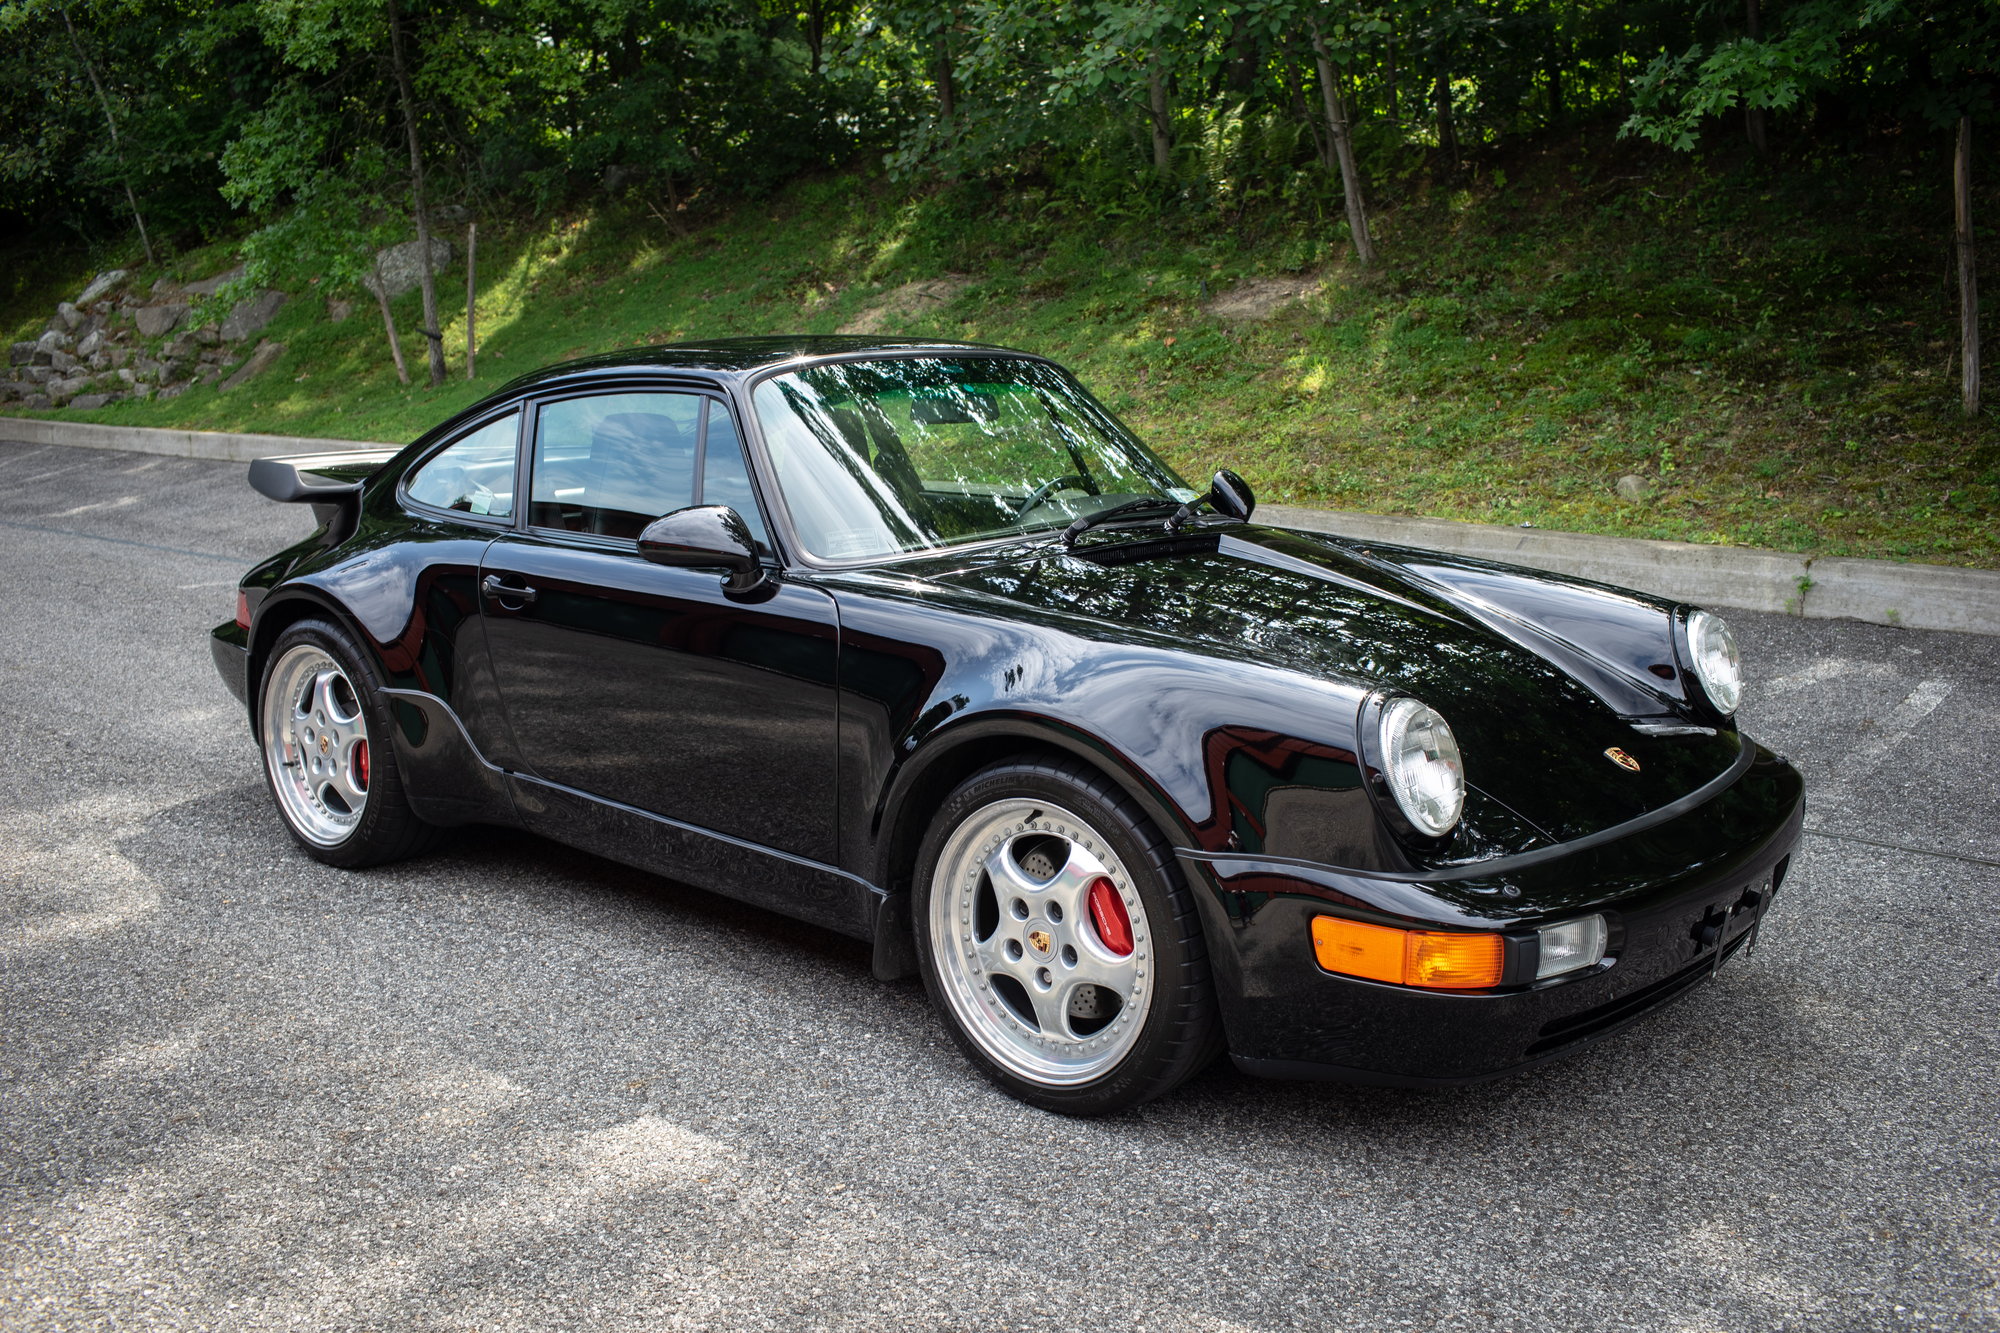 1994 Porsche 911 - 1994 Porsche 911 964 3.6 Turbo - NY - Used - VIN WP0AC2962RS480381 - 14,689 Miles - 6 cyl - 2WD - Manual - Coupe - Black - Bedford Hills, NY 10507, United States